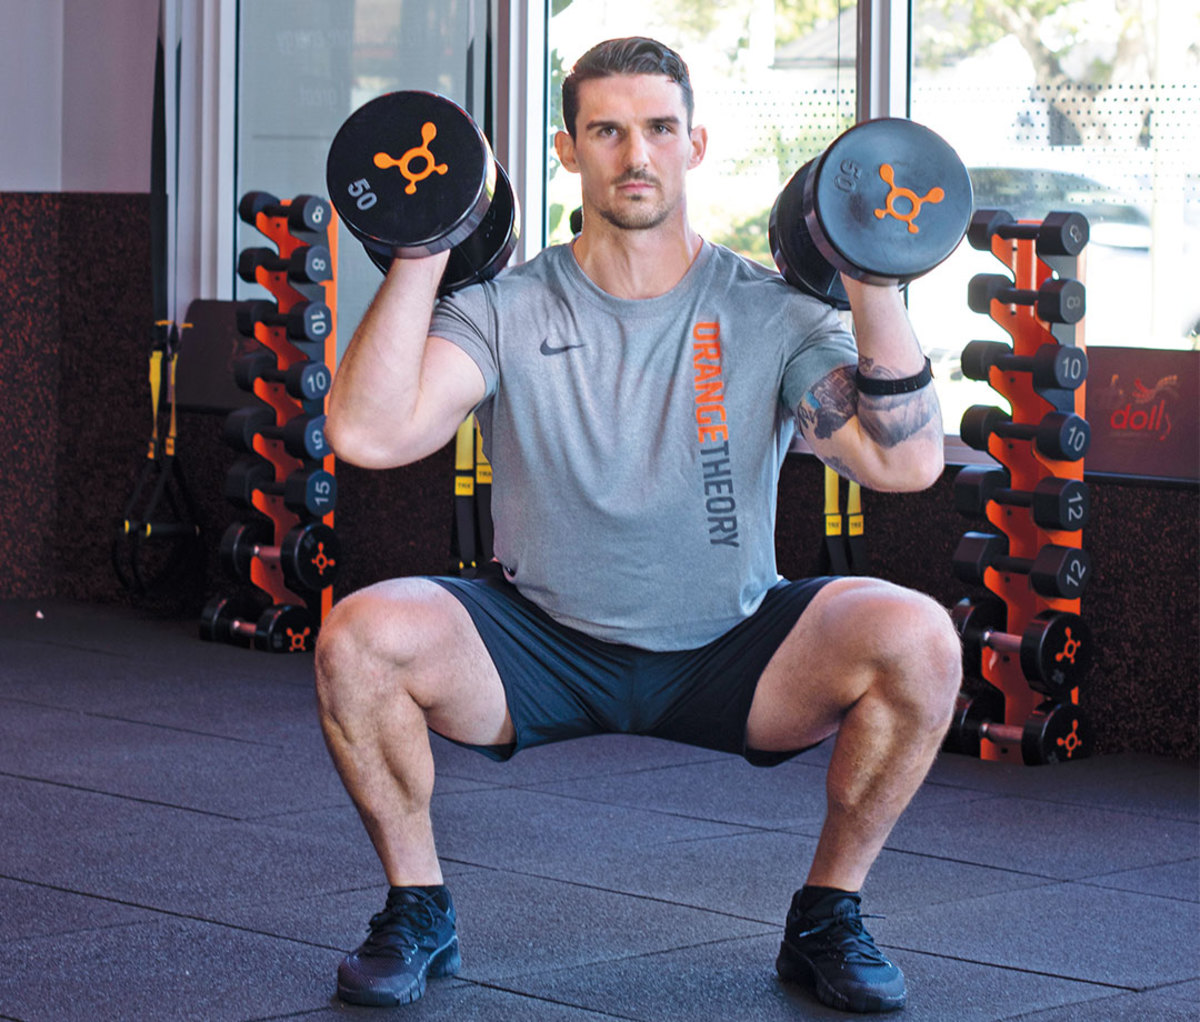 Dumbbell squats to alternating one-arm presses with rotation